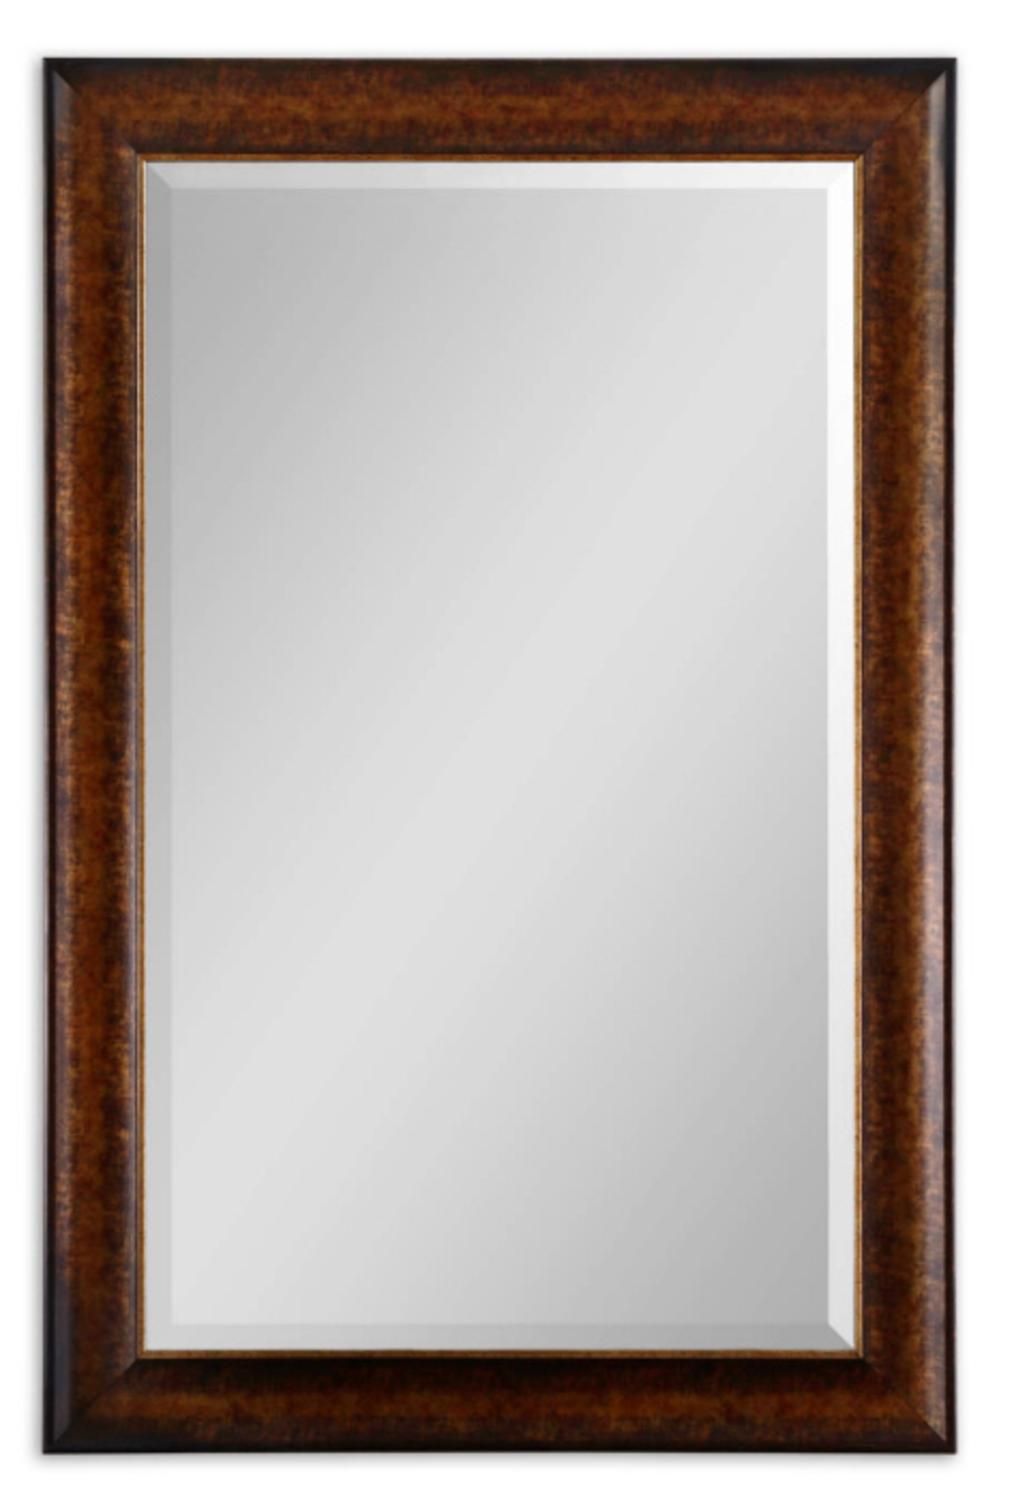 58" Rustic Bronze With Silver Tones Framed Beveled Rectangular Wall Pertaining To Silver Beveled Wall Mirrors (View 7 of 15)